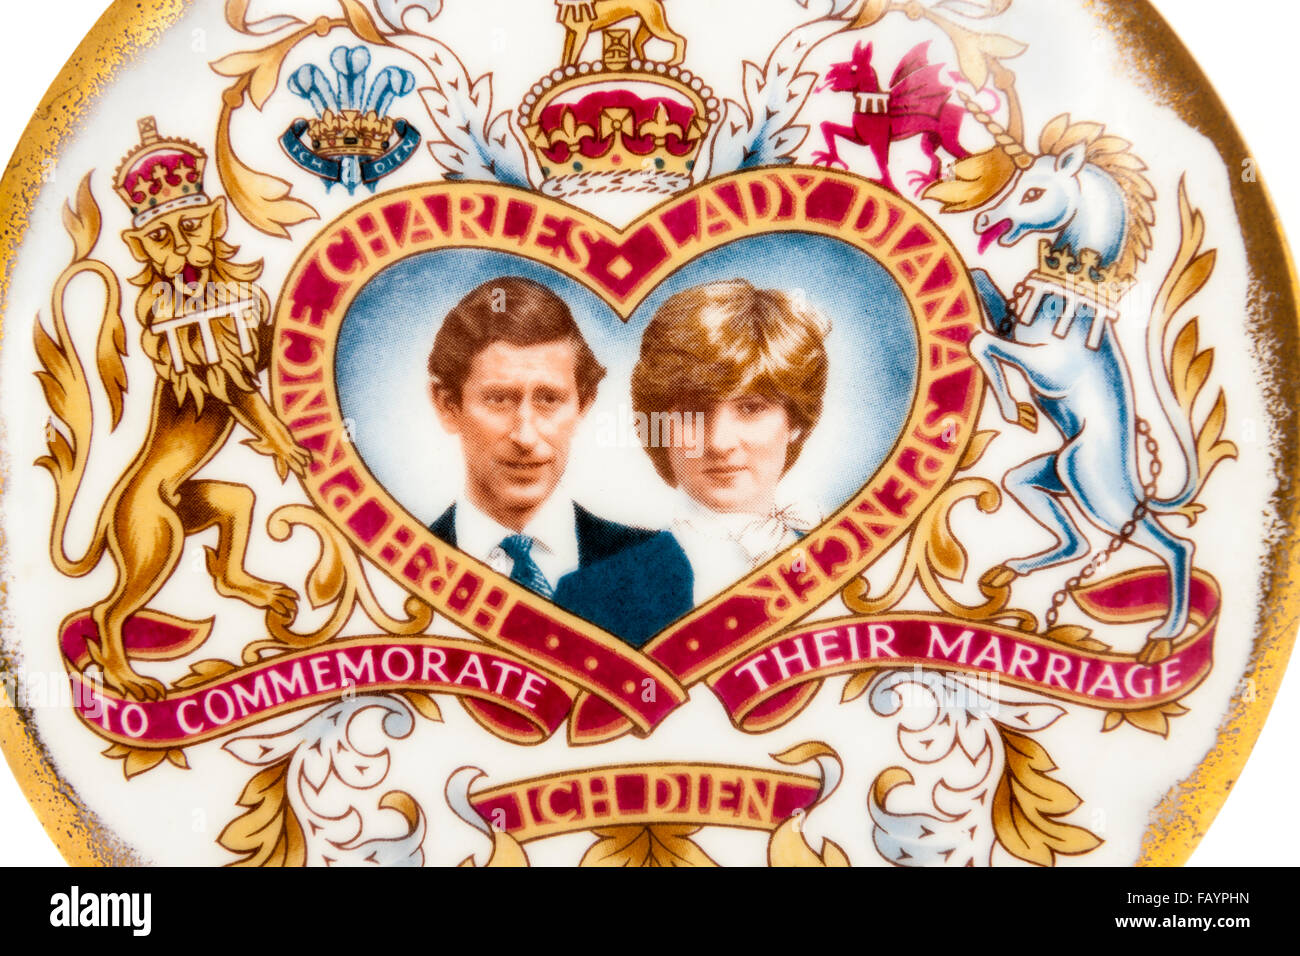 Souvenir plaque by Fenton China commemorating the Marriage of HRH Prince Charles and Lady Diana Spencer on 29 July 1981 Stock Photo